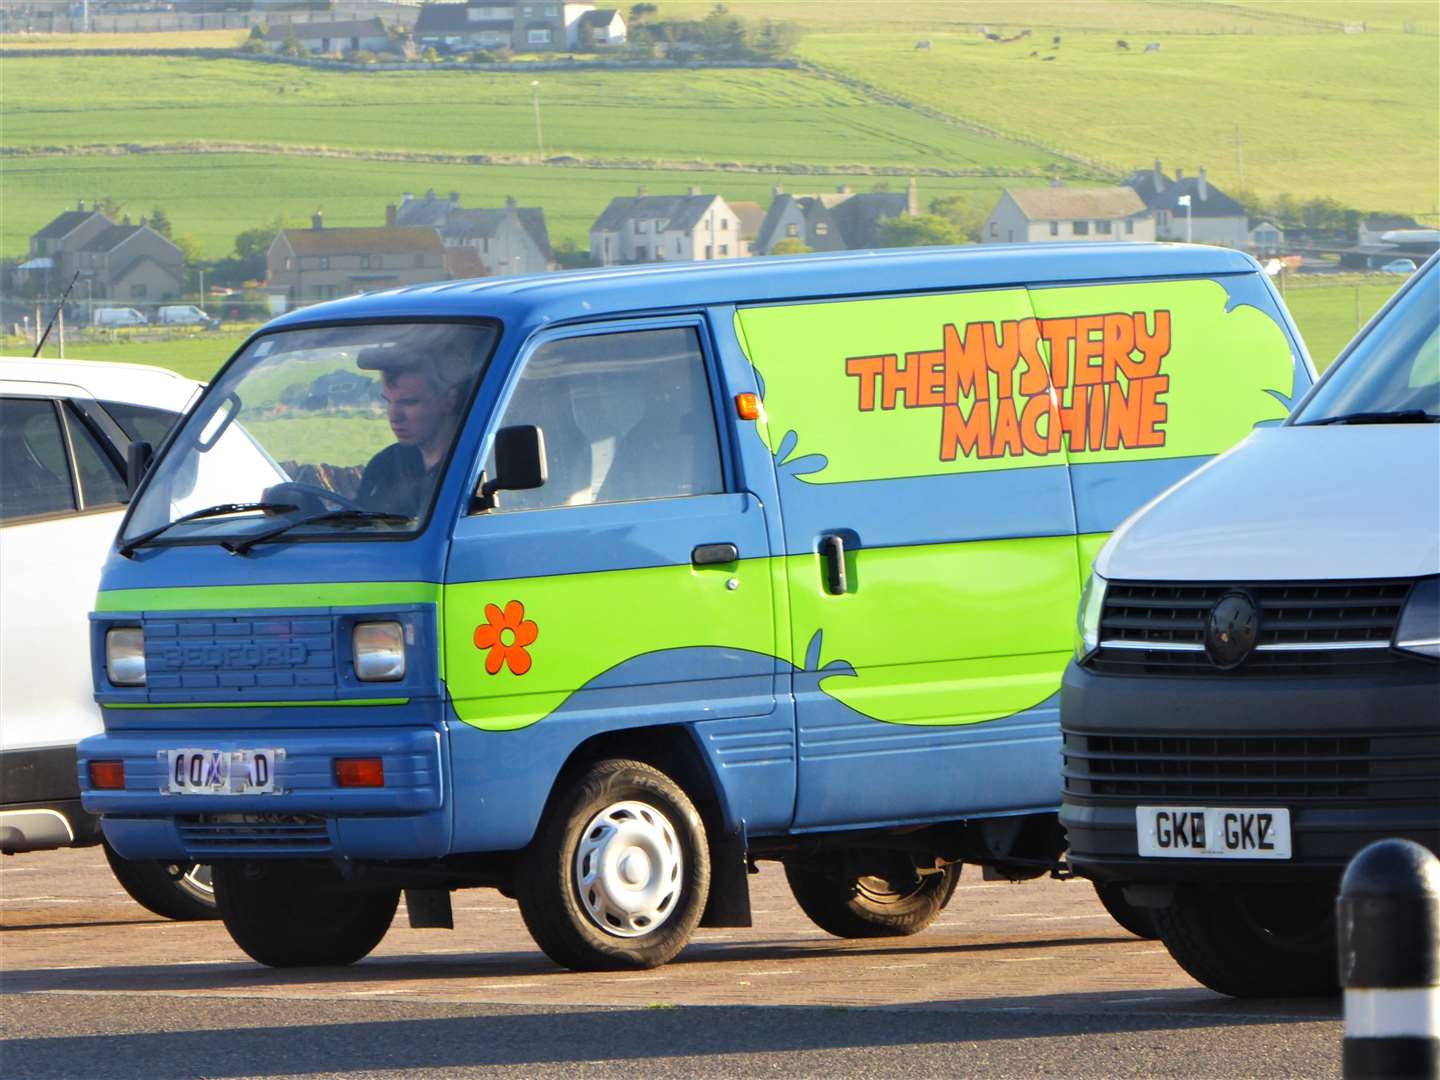 The Mystery Machine was seen at Wick Tesco car park but where was Scooby Doo? Picture: DGS